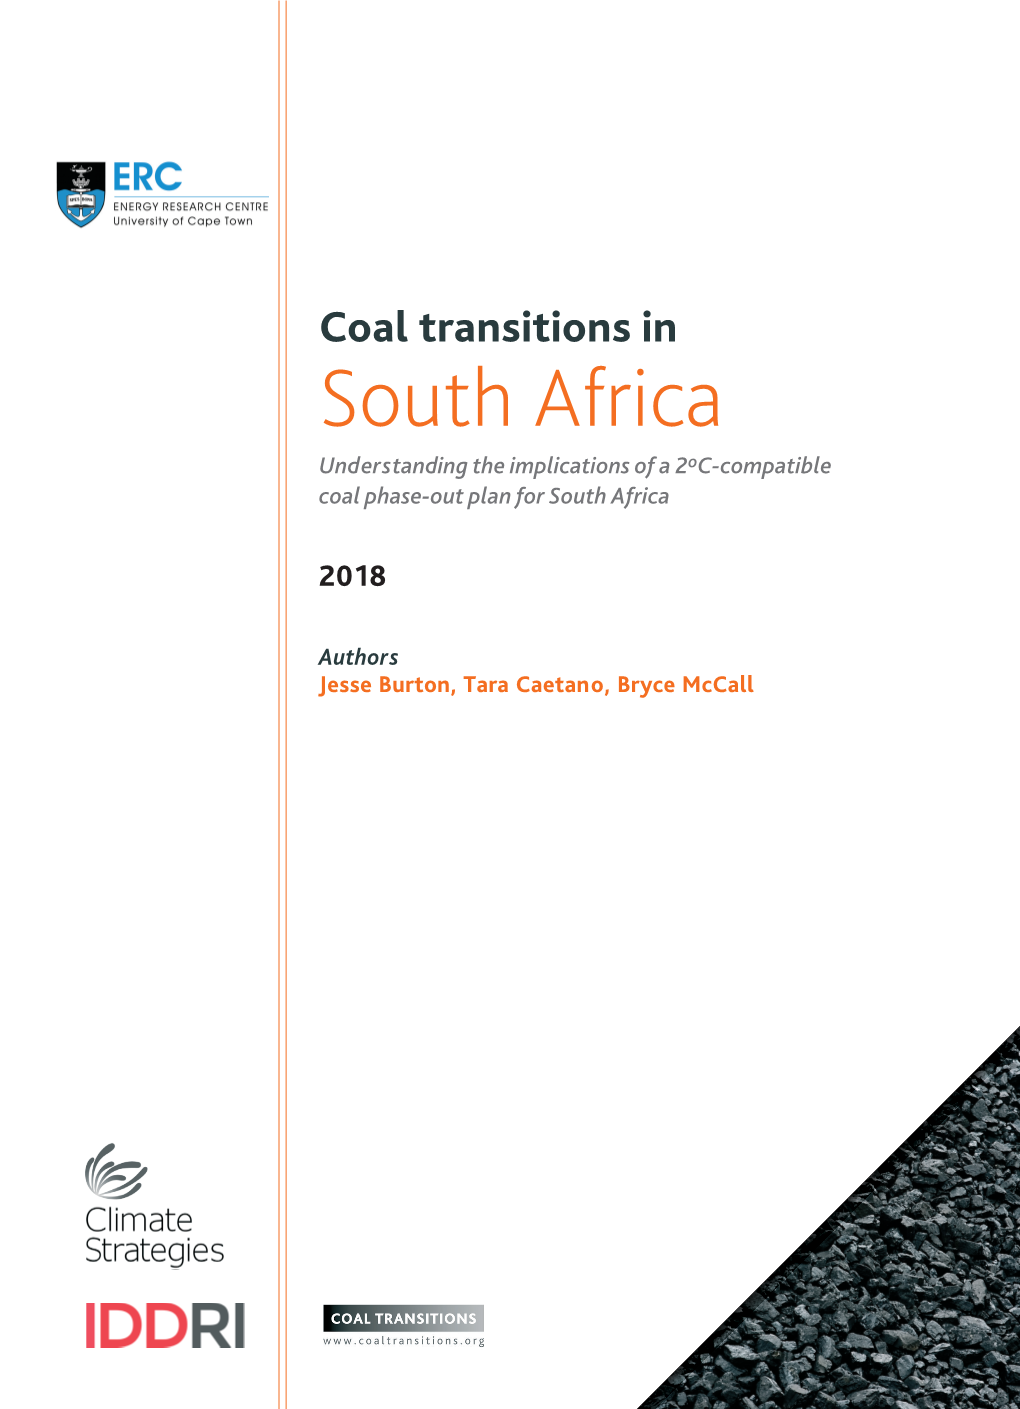 Coal Transition in South Africa Understanding the Implications of a 2Oc-Compatible Coal Phase-Out Plan for South Africa a Project Funded by the KR Foundation